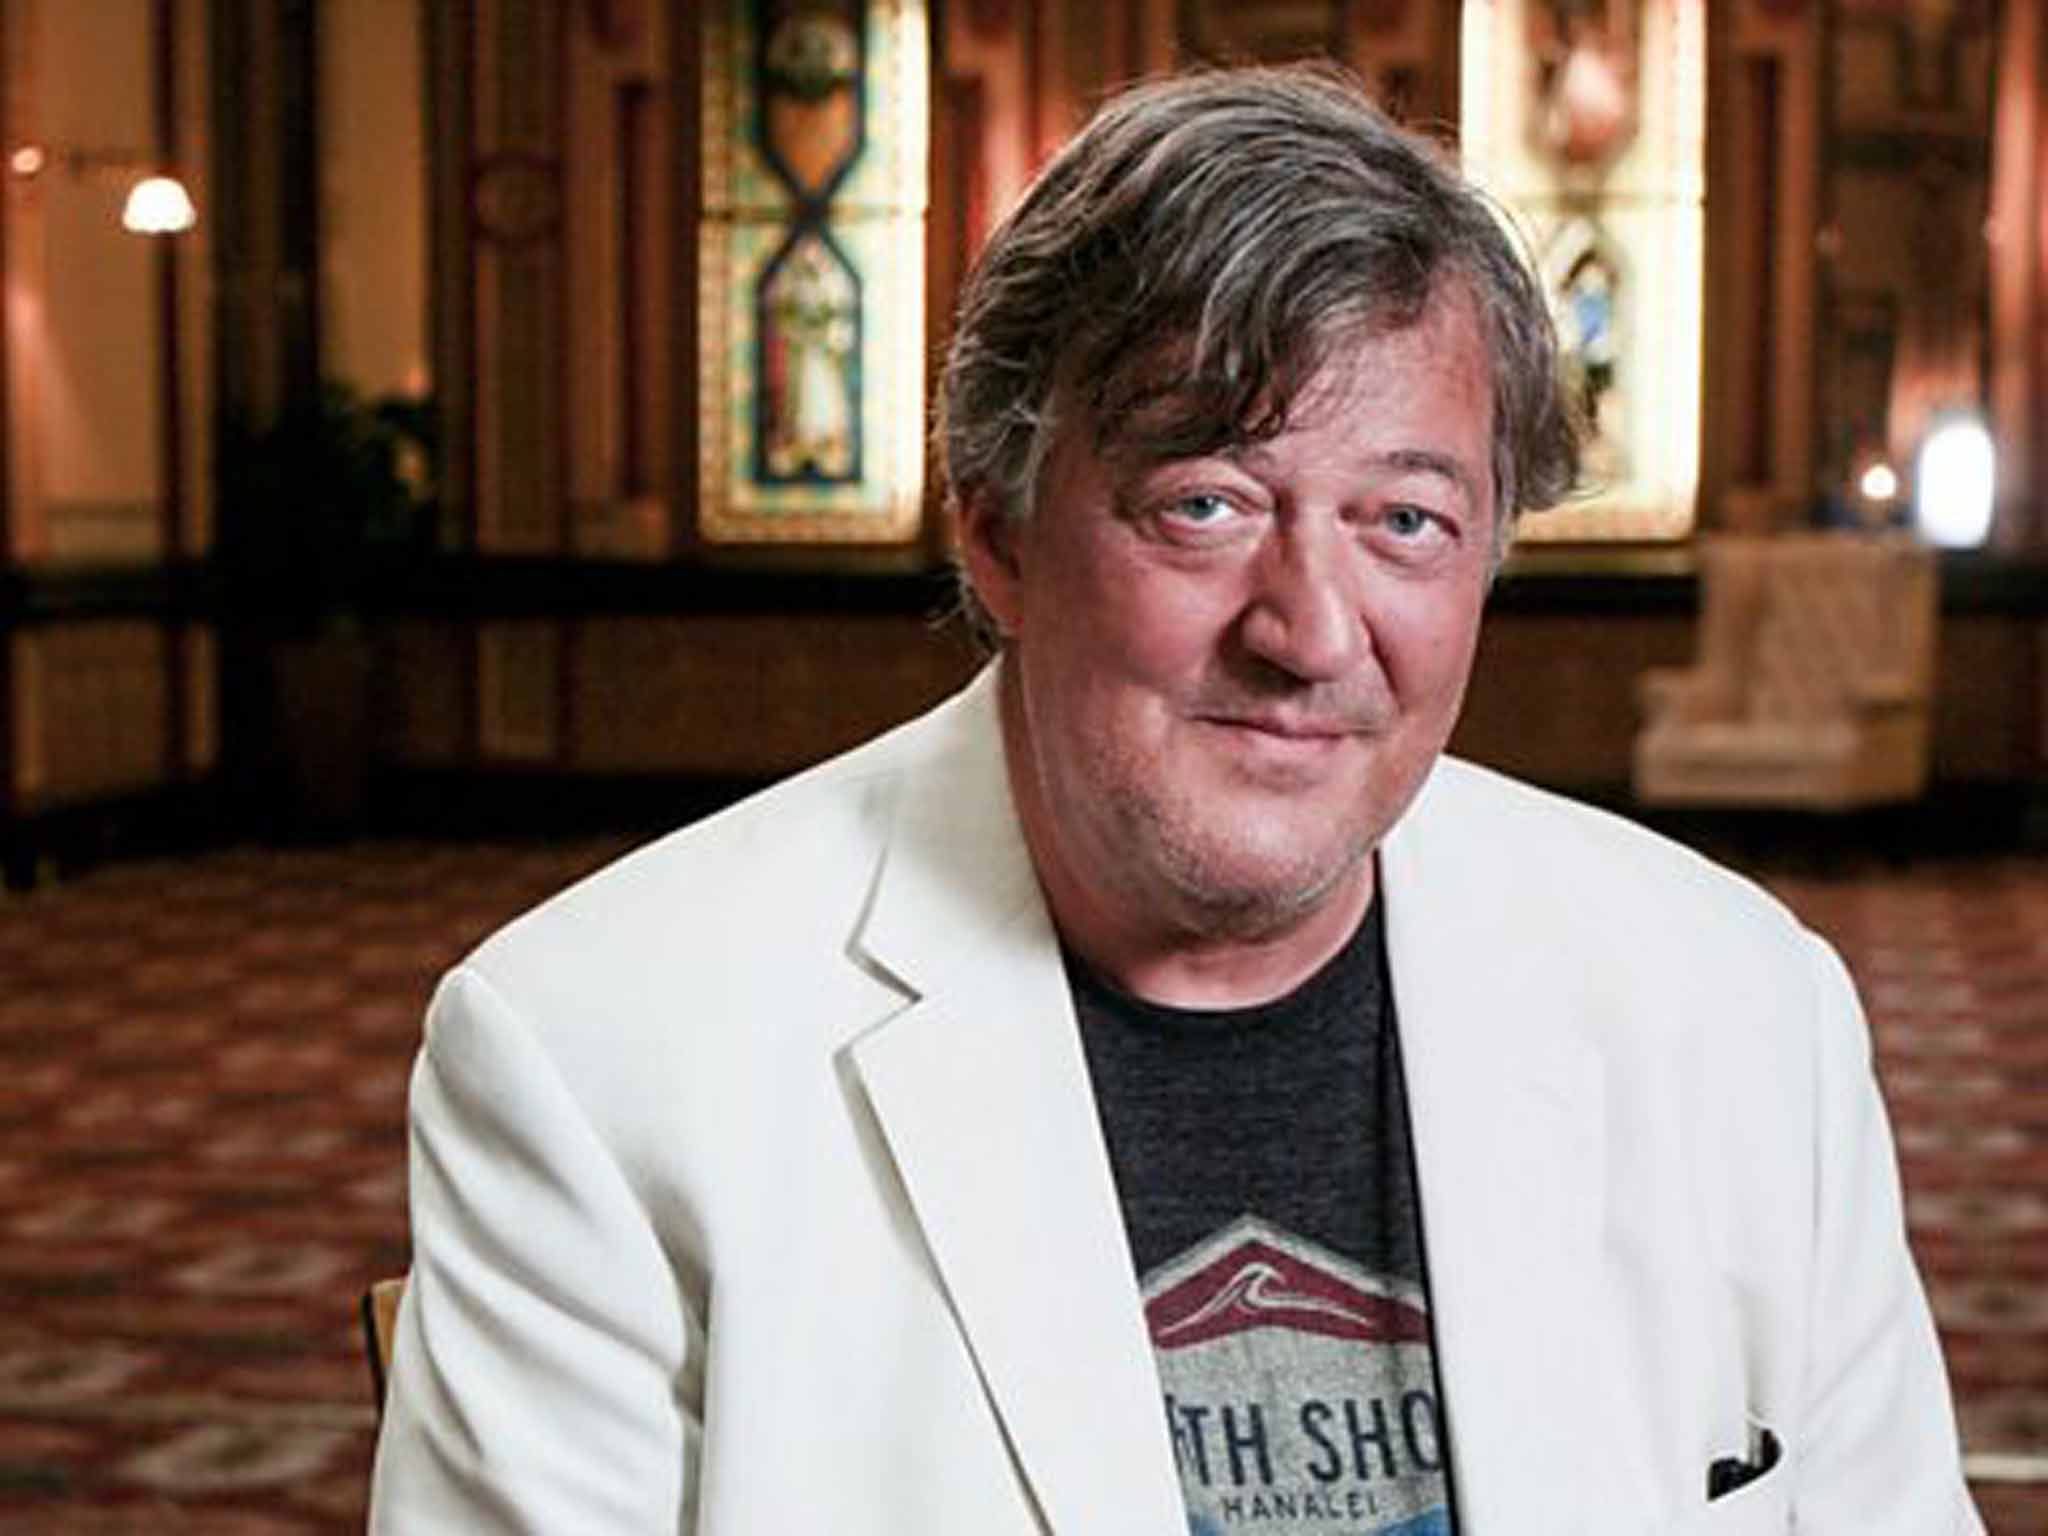 Stephen Fry has shown his support for humanist ceremonies